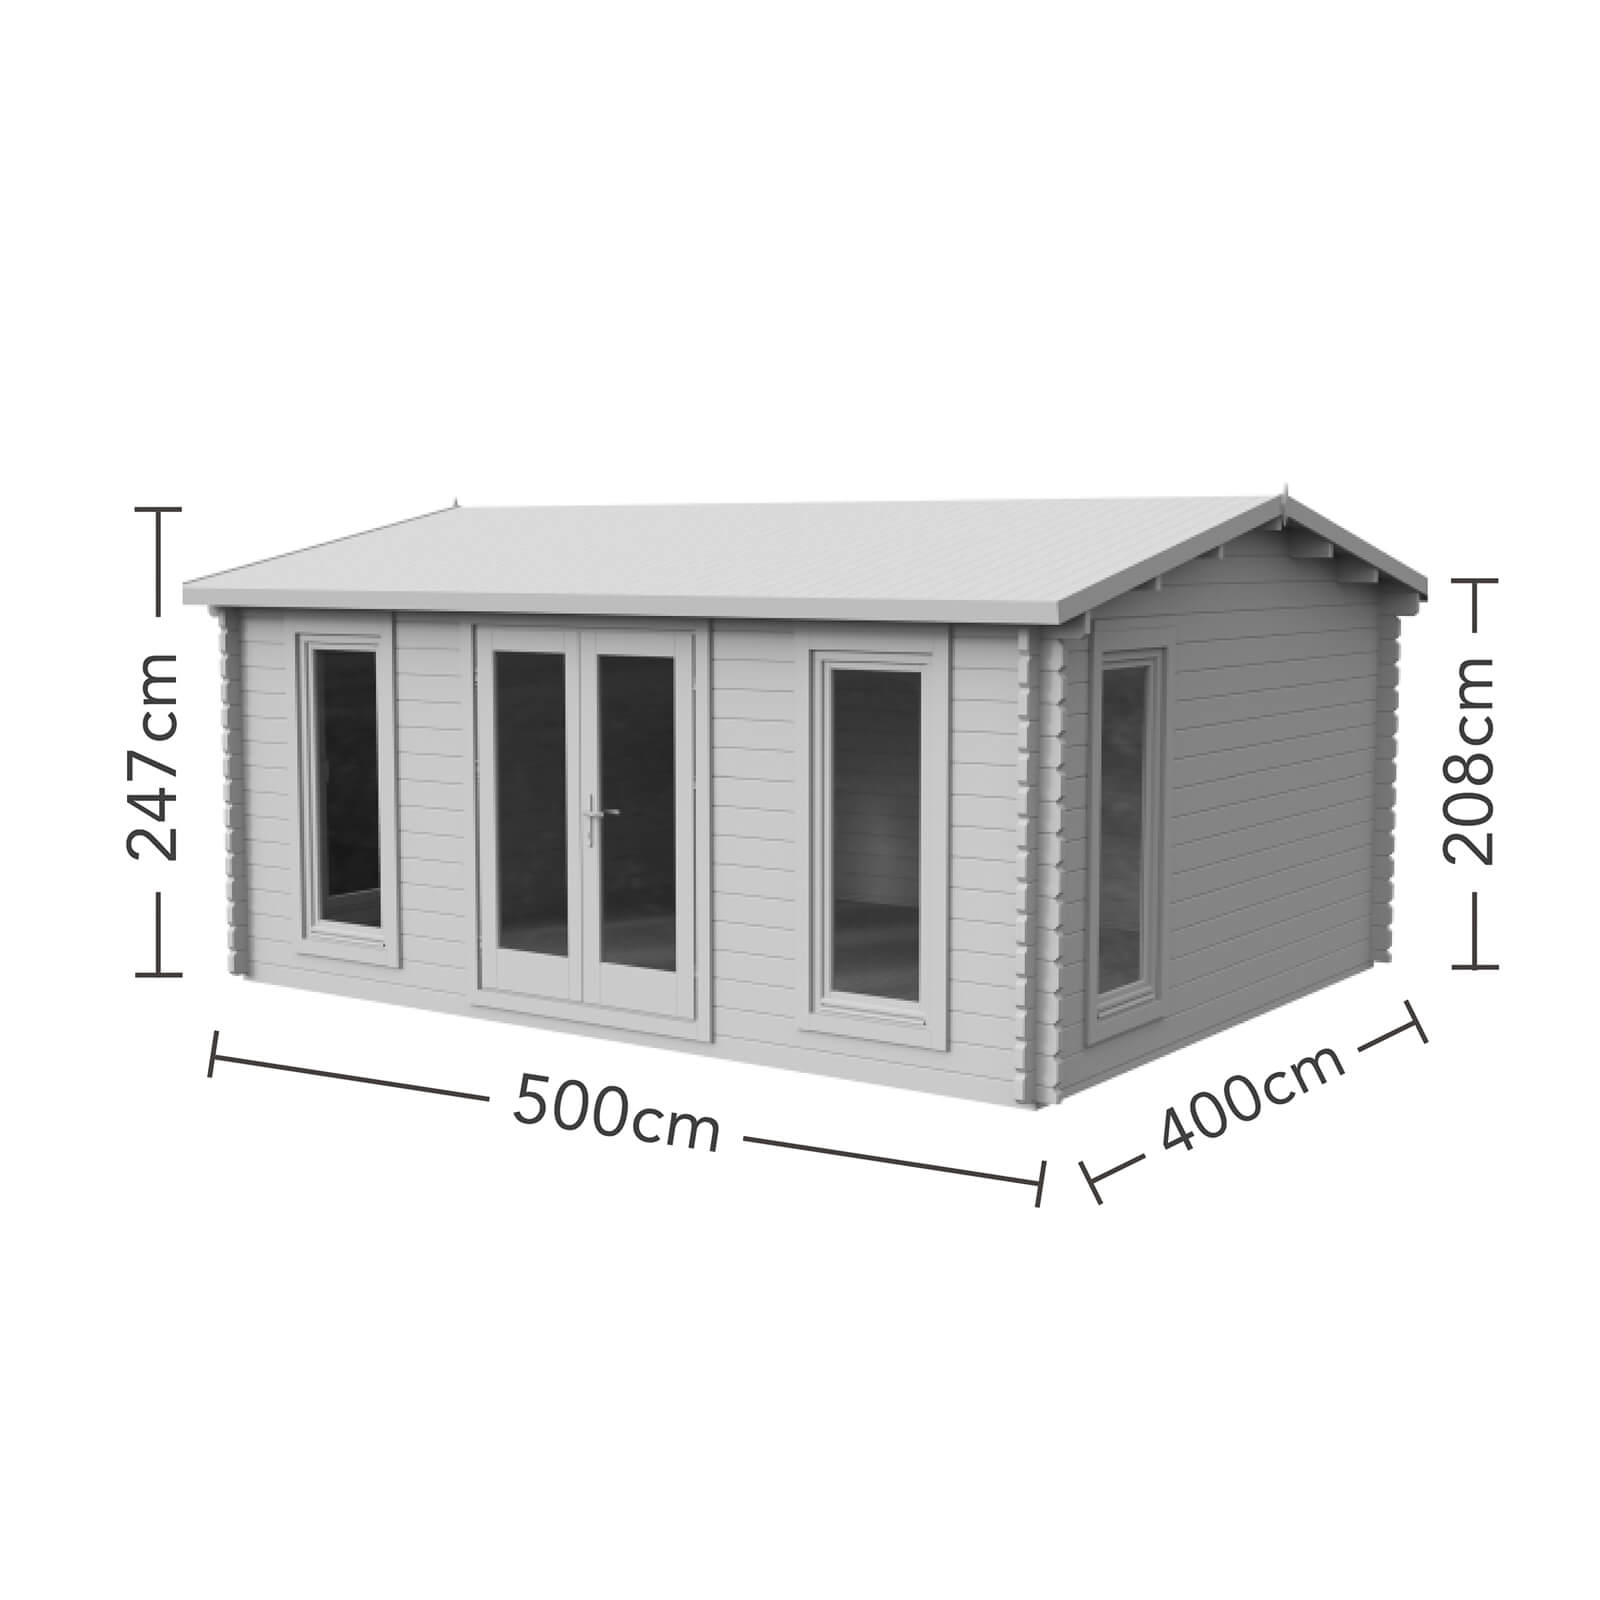 Forest Rushock 5.0m x 4.0m Log Cabin Double Glazed 24kg Polyester Felt, No Underlay - Installation Included